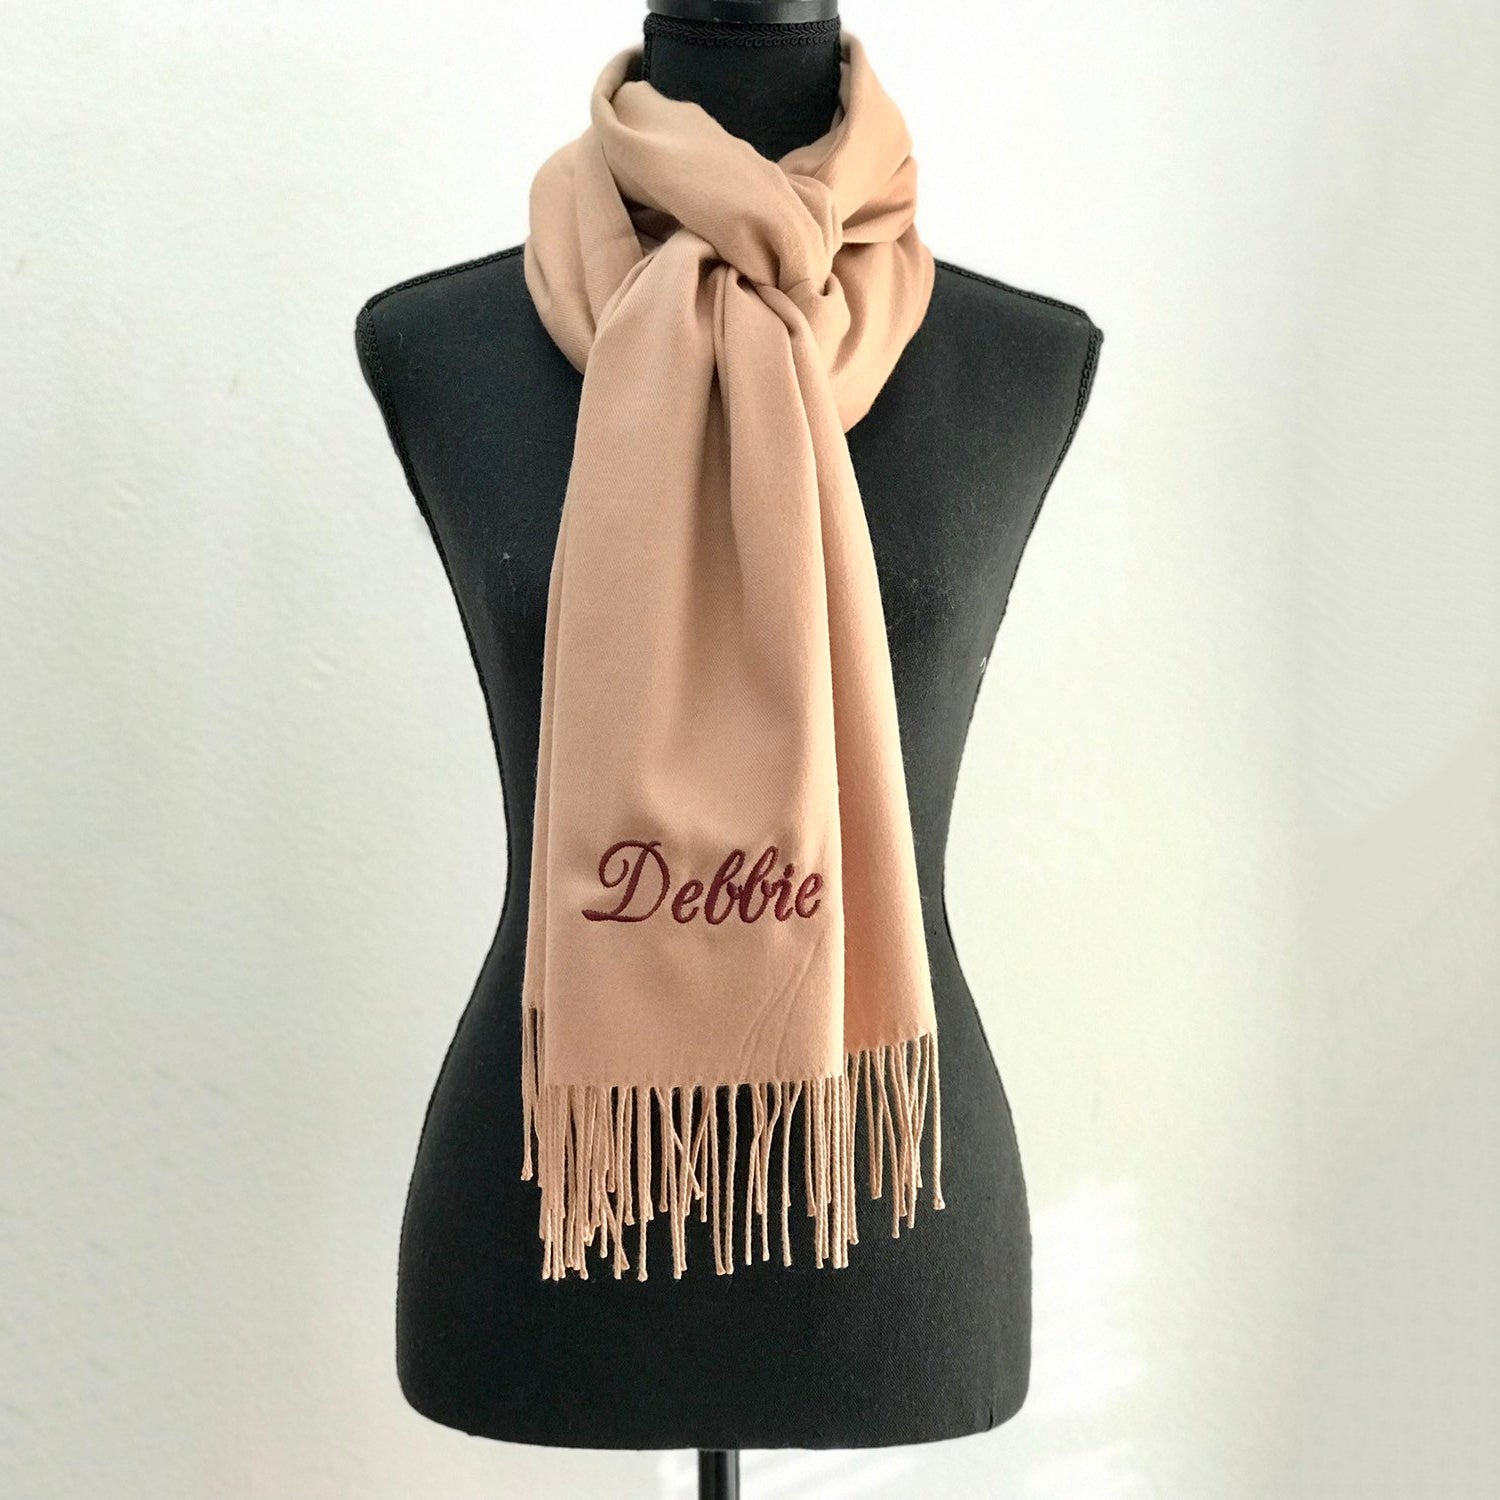 personalized embroidered scarf